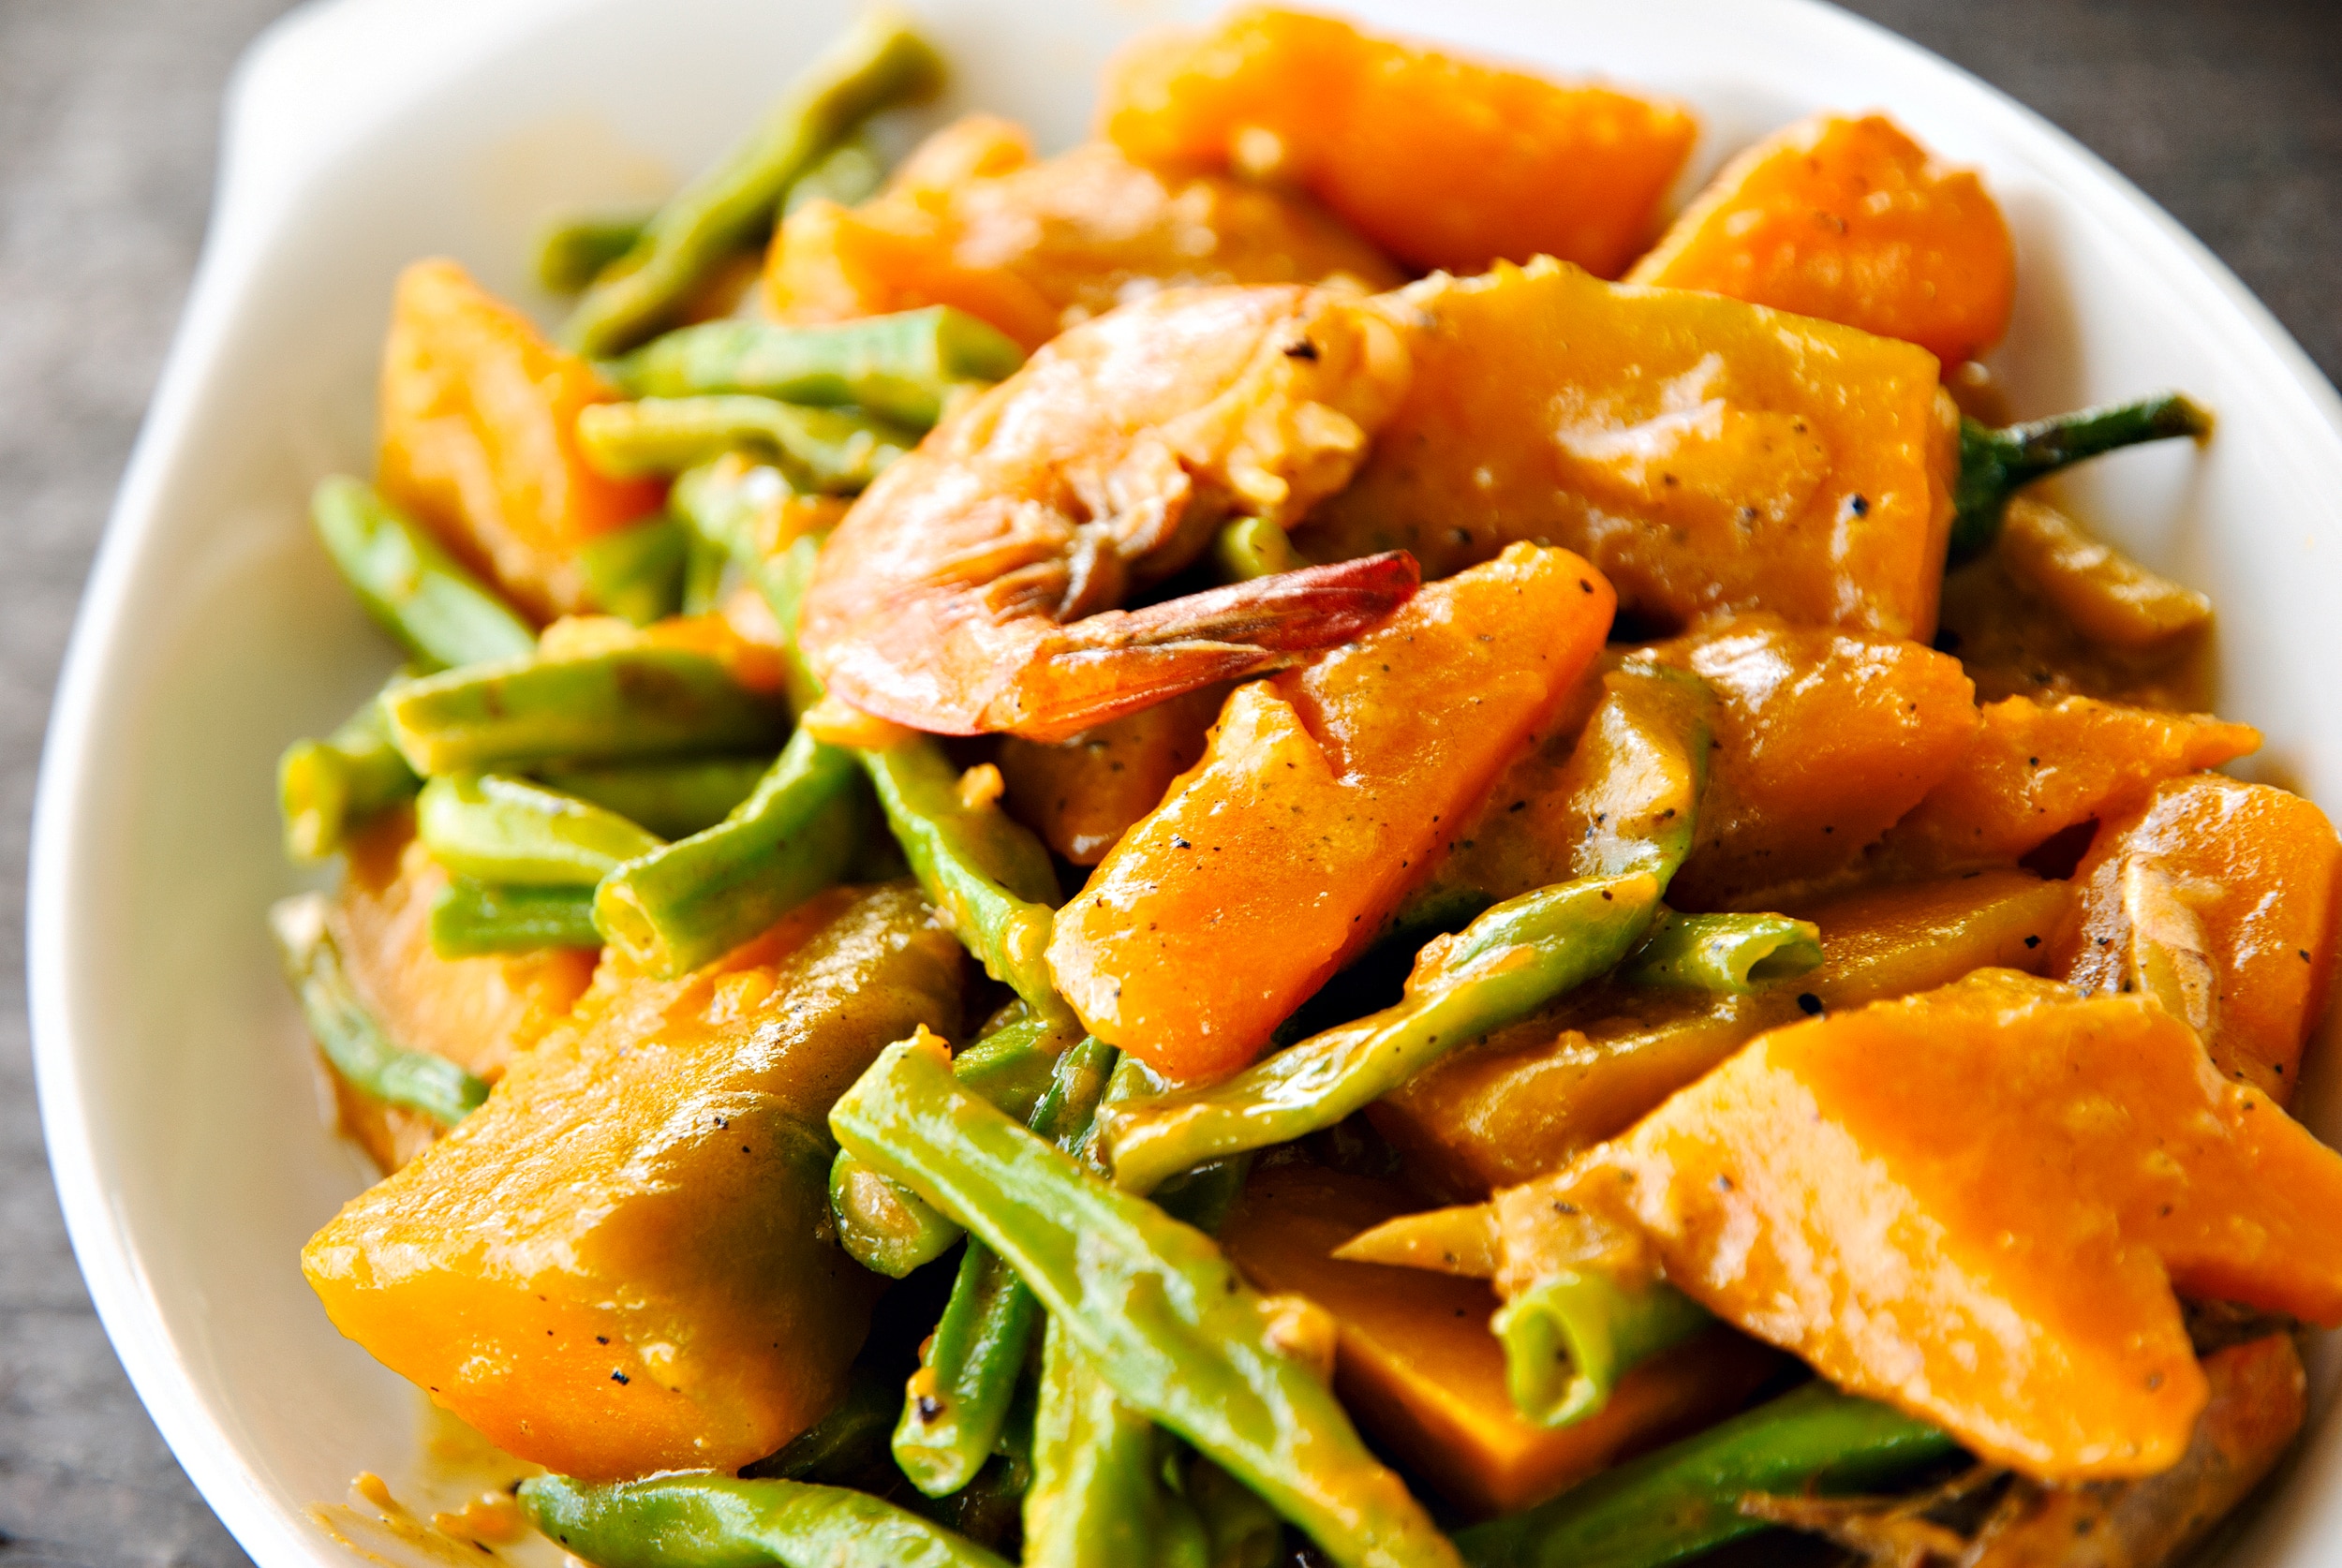 A huge serving of pumpkin, green beans, and shrimp cooked in coconut milk